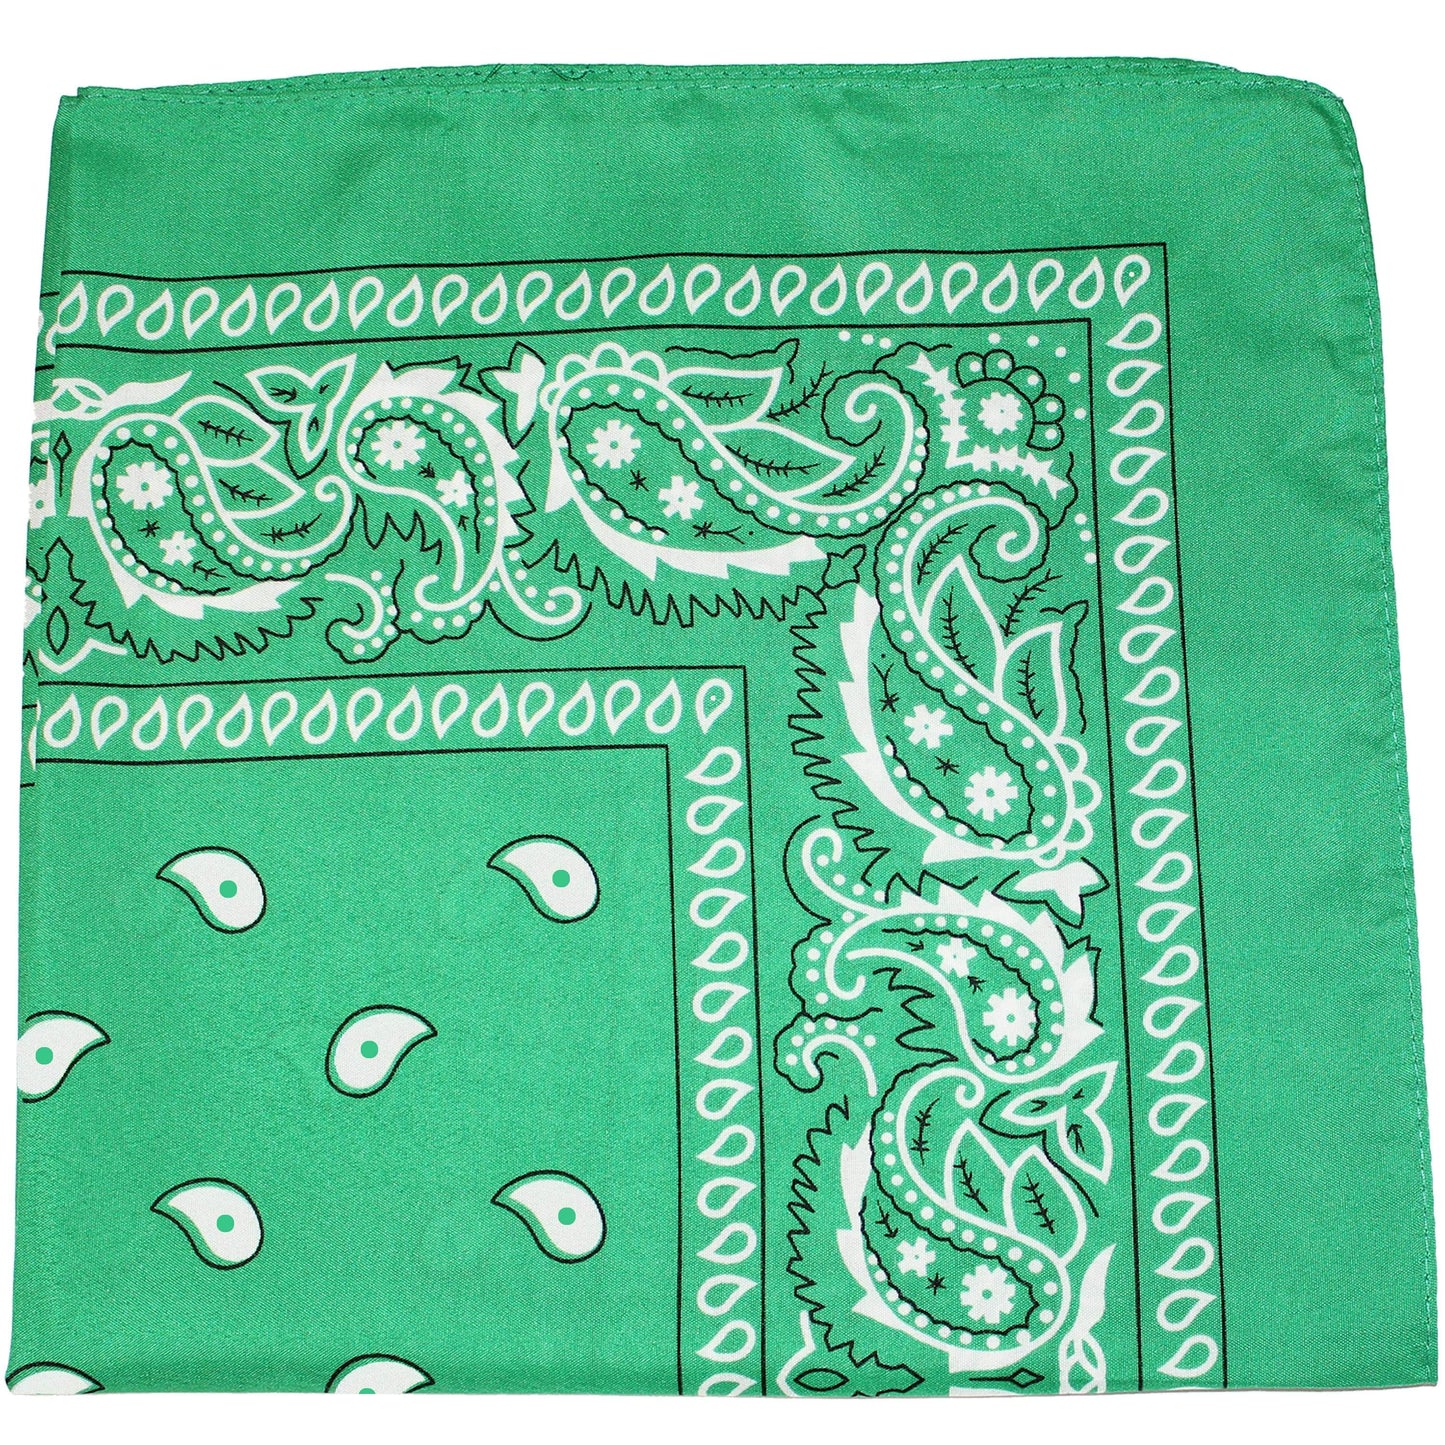 Pack of 30 Polyester 22 x 22 Inch Paisley Printed Bandanas